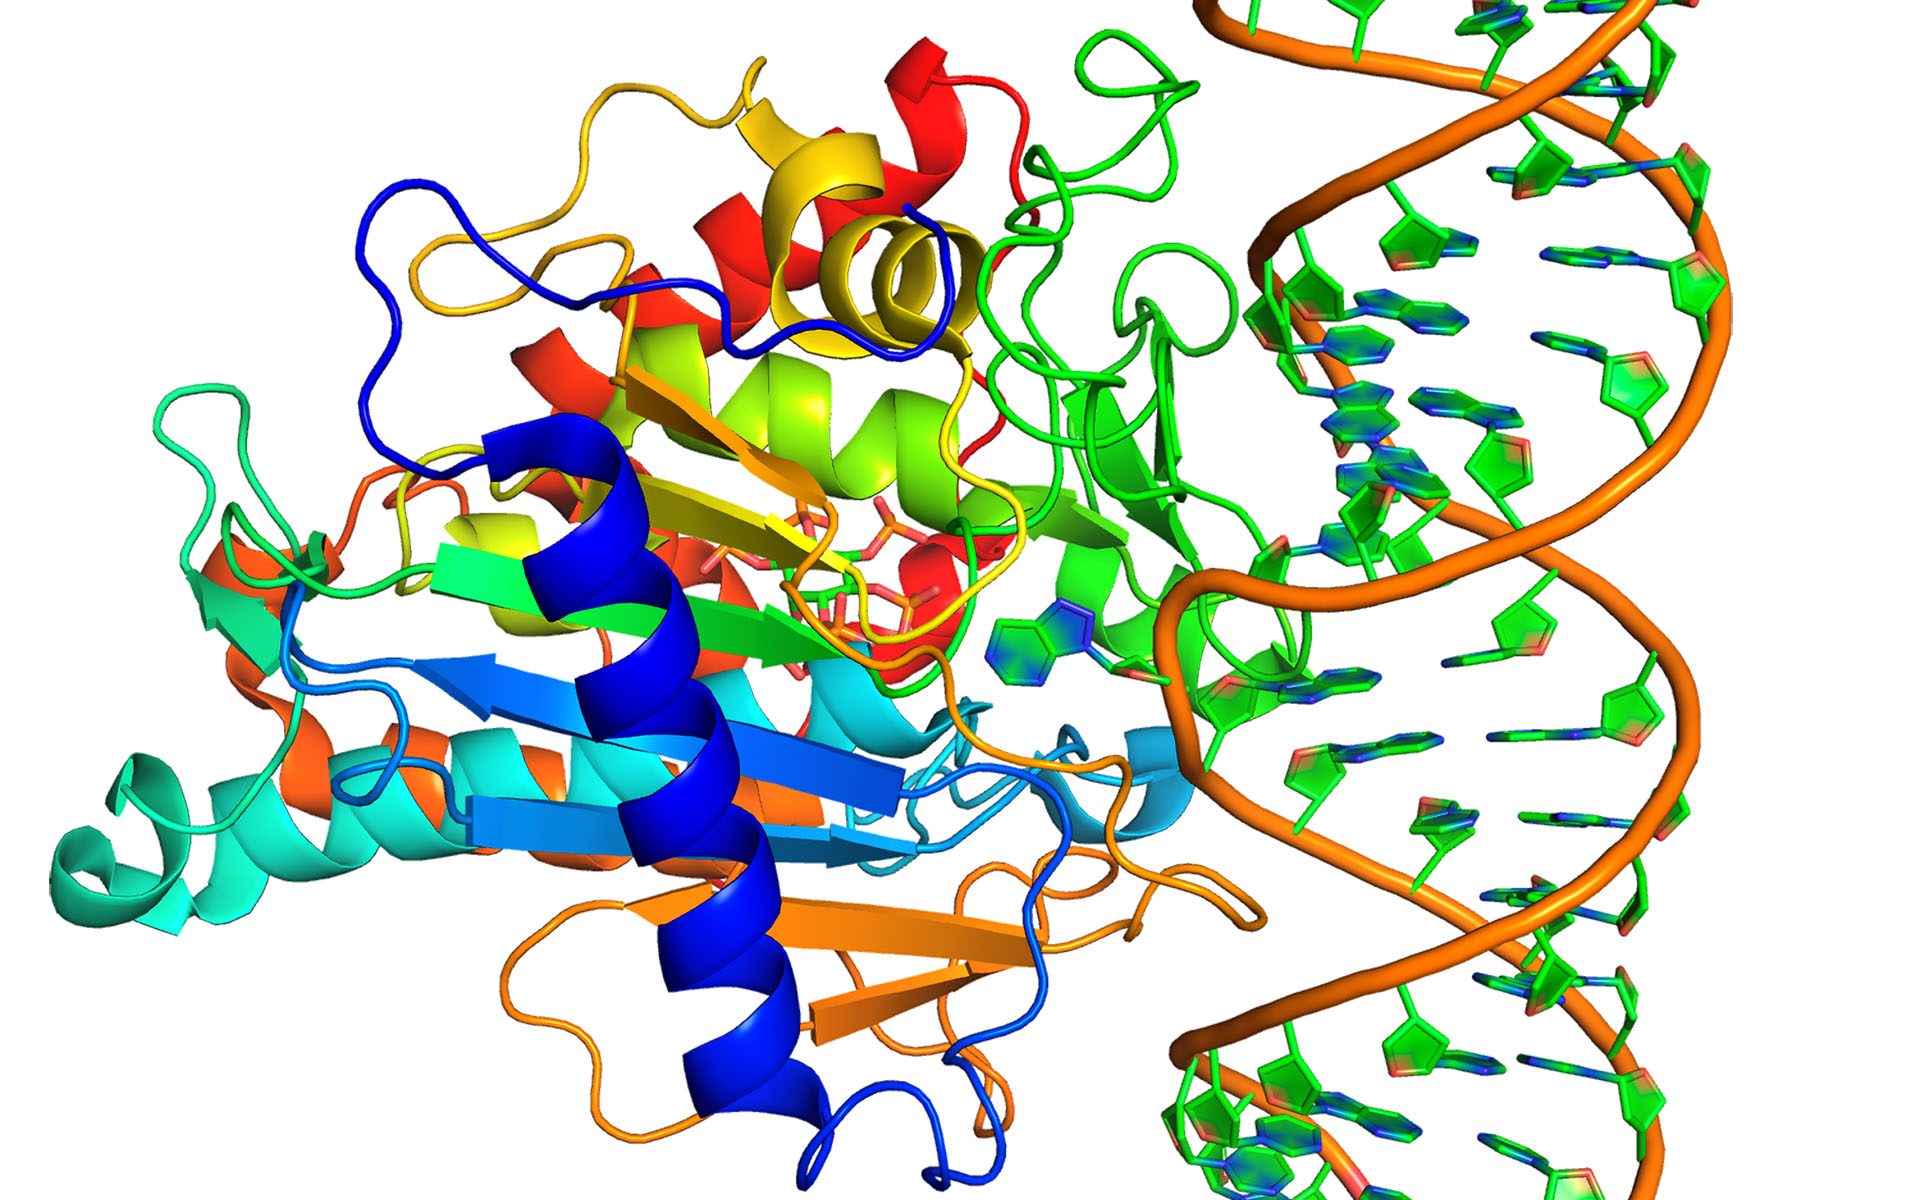 The crystal structure of human ADAR, where dysregulation by Zika may lead to neurological damage